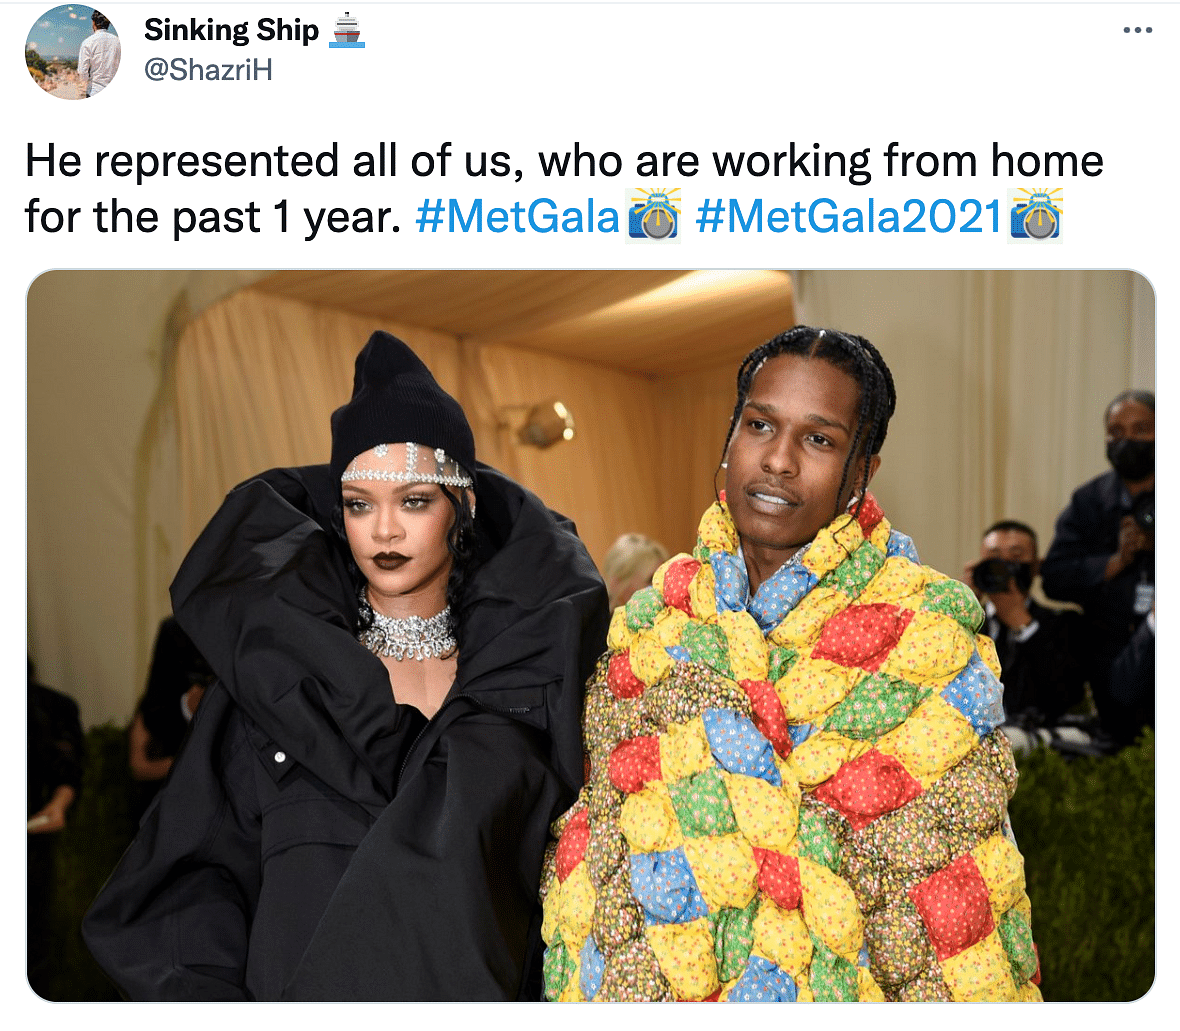 Met Gala 2021 Pictures Are Out, and So Are Memes! Check Them Out Here